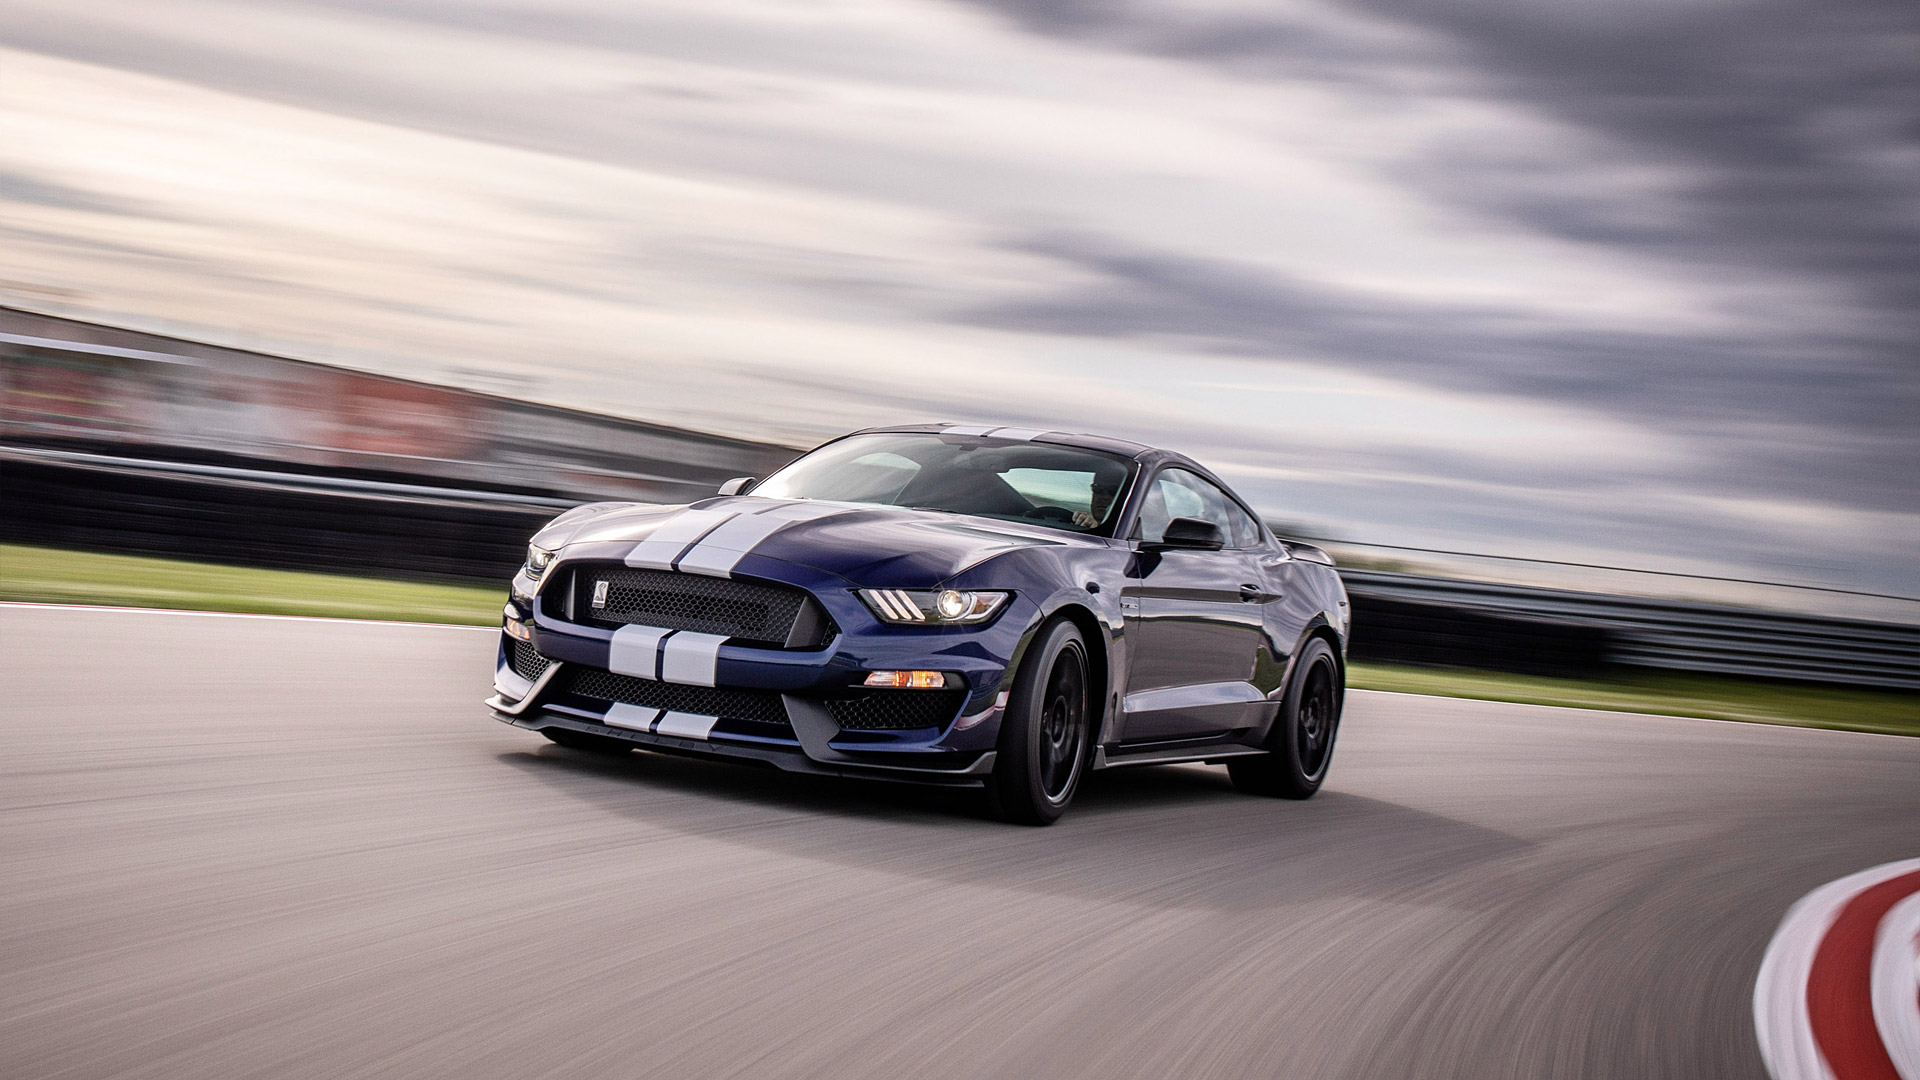 Ford Shelby Mustang Gt350 Wallpaper HD Image Wsupercars